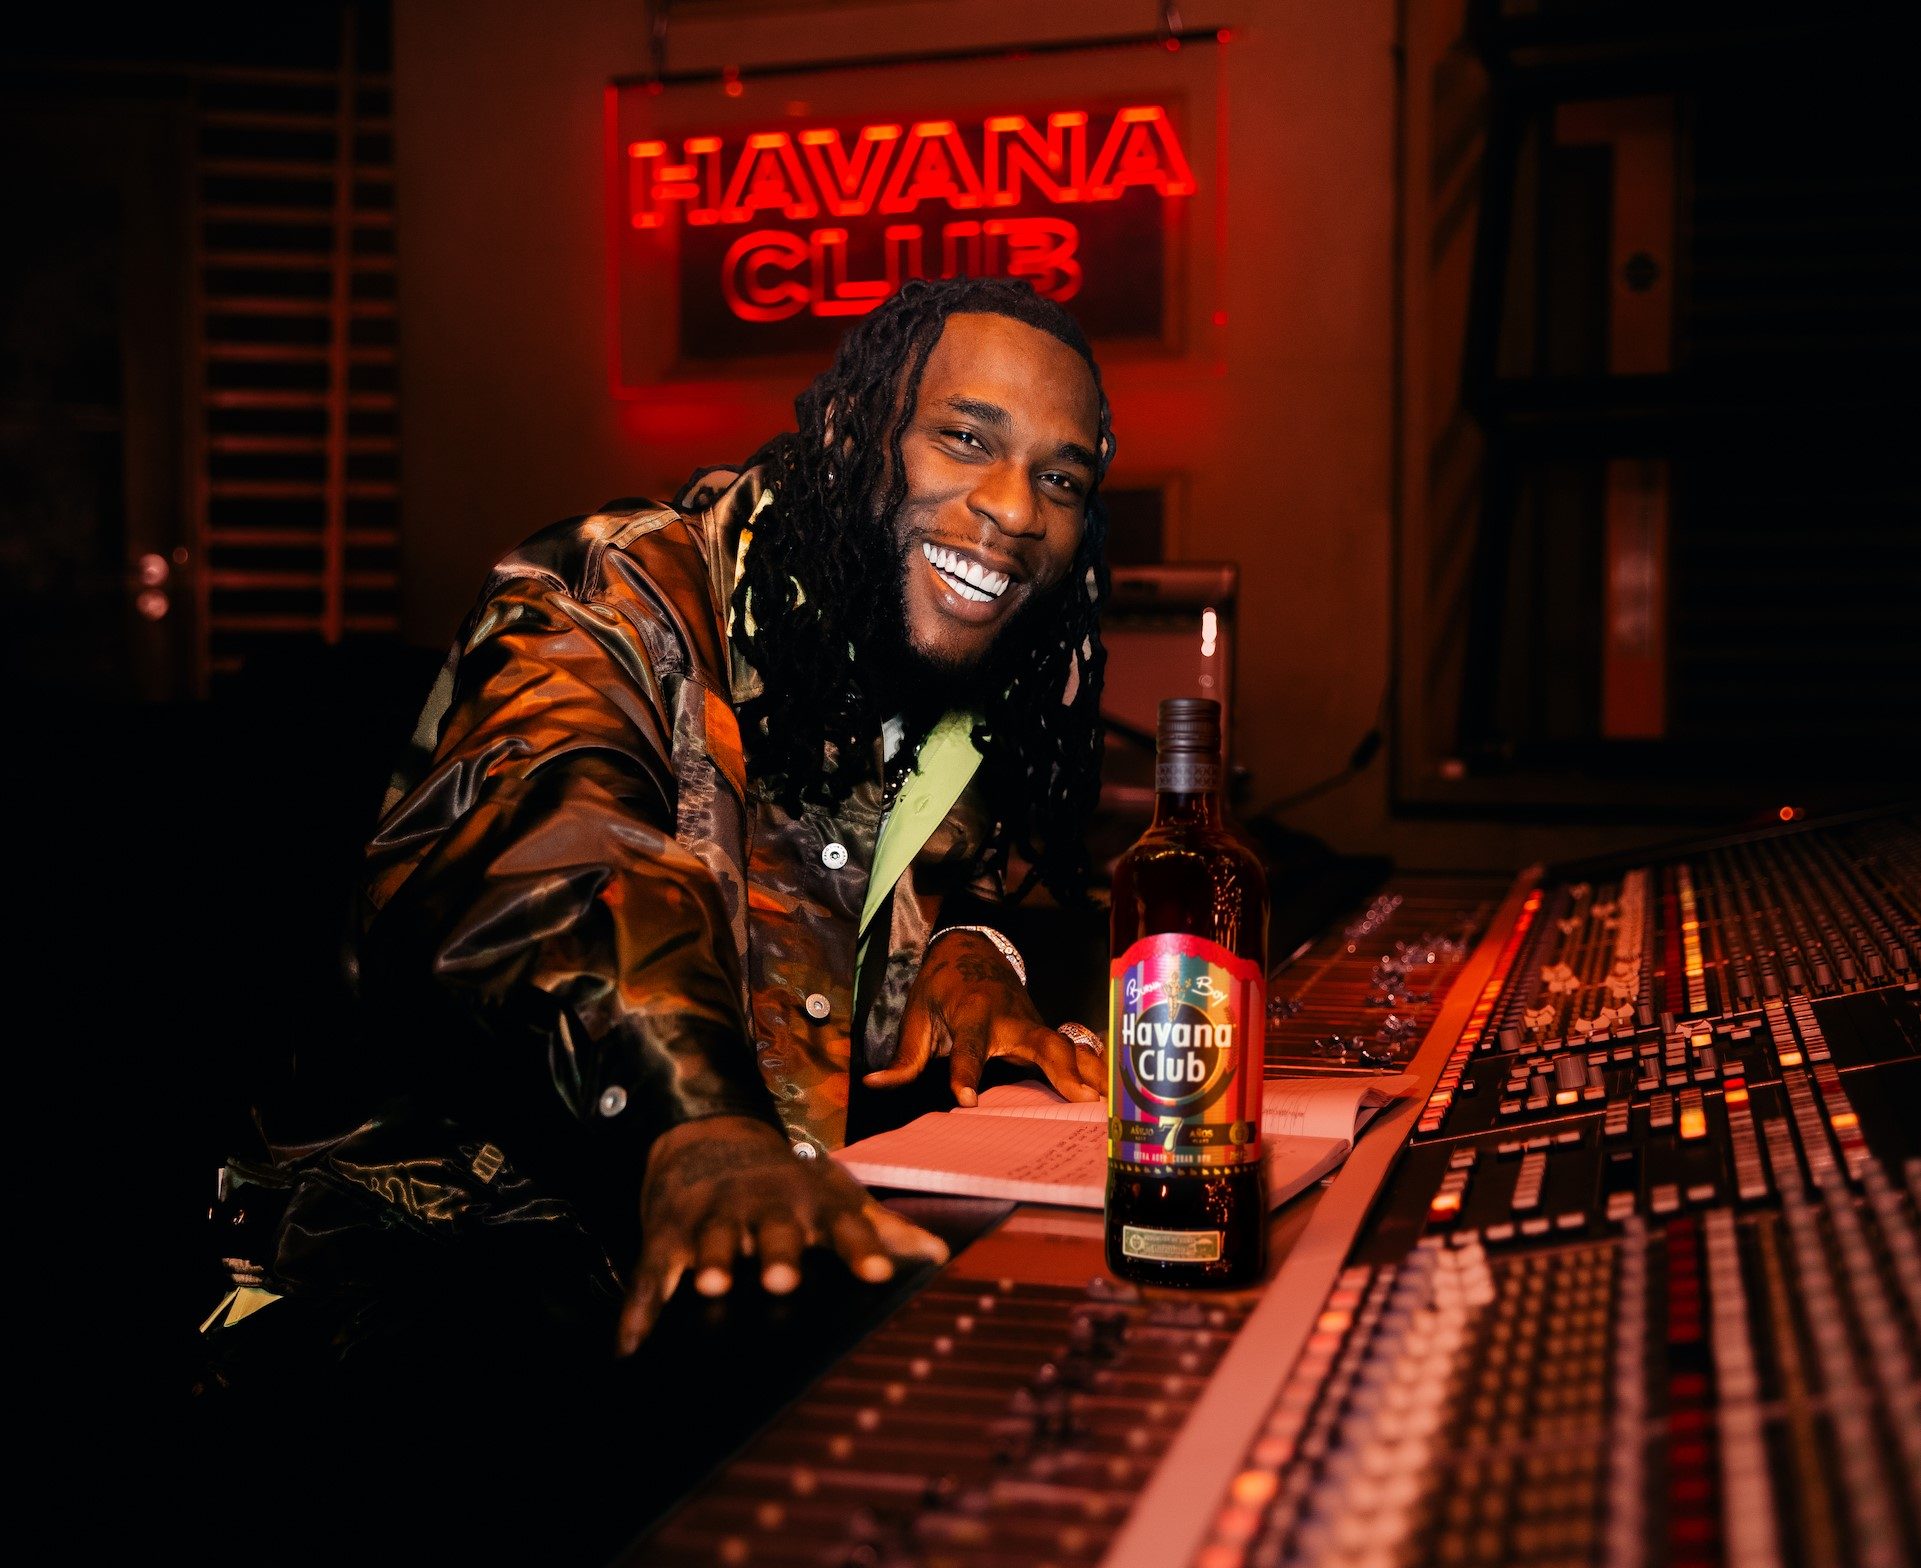 Burna Boy with its Limited Edition at the studio